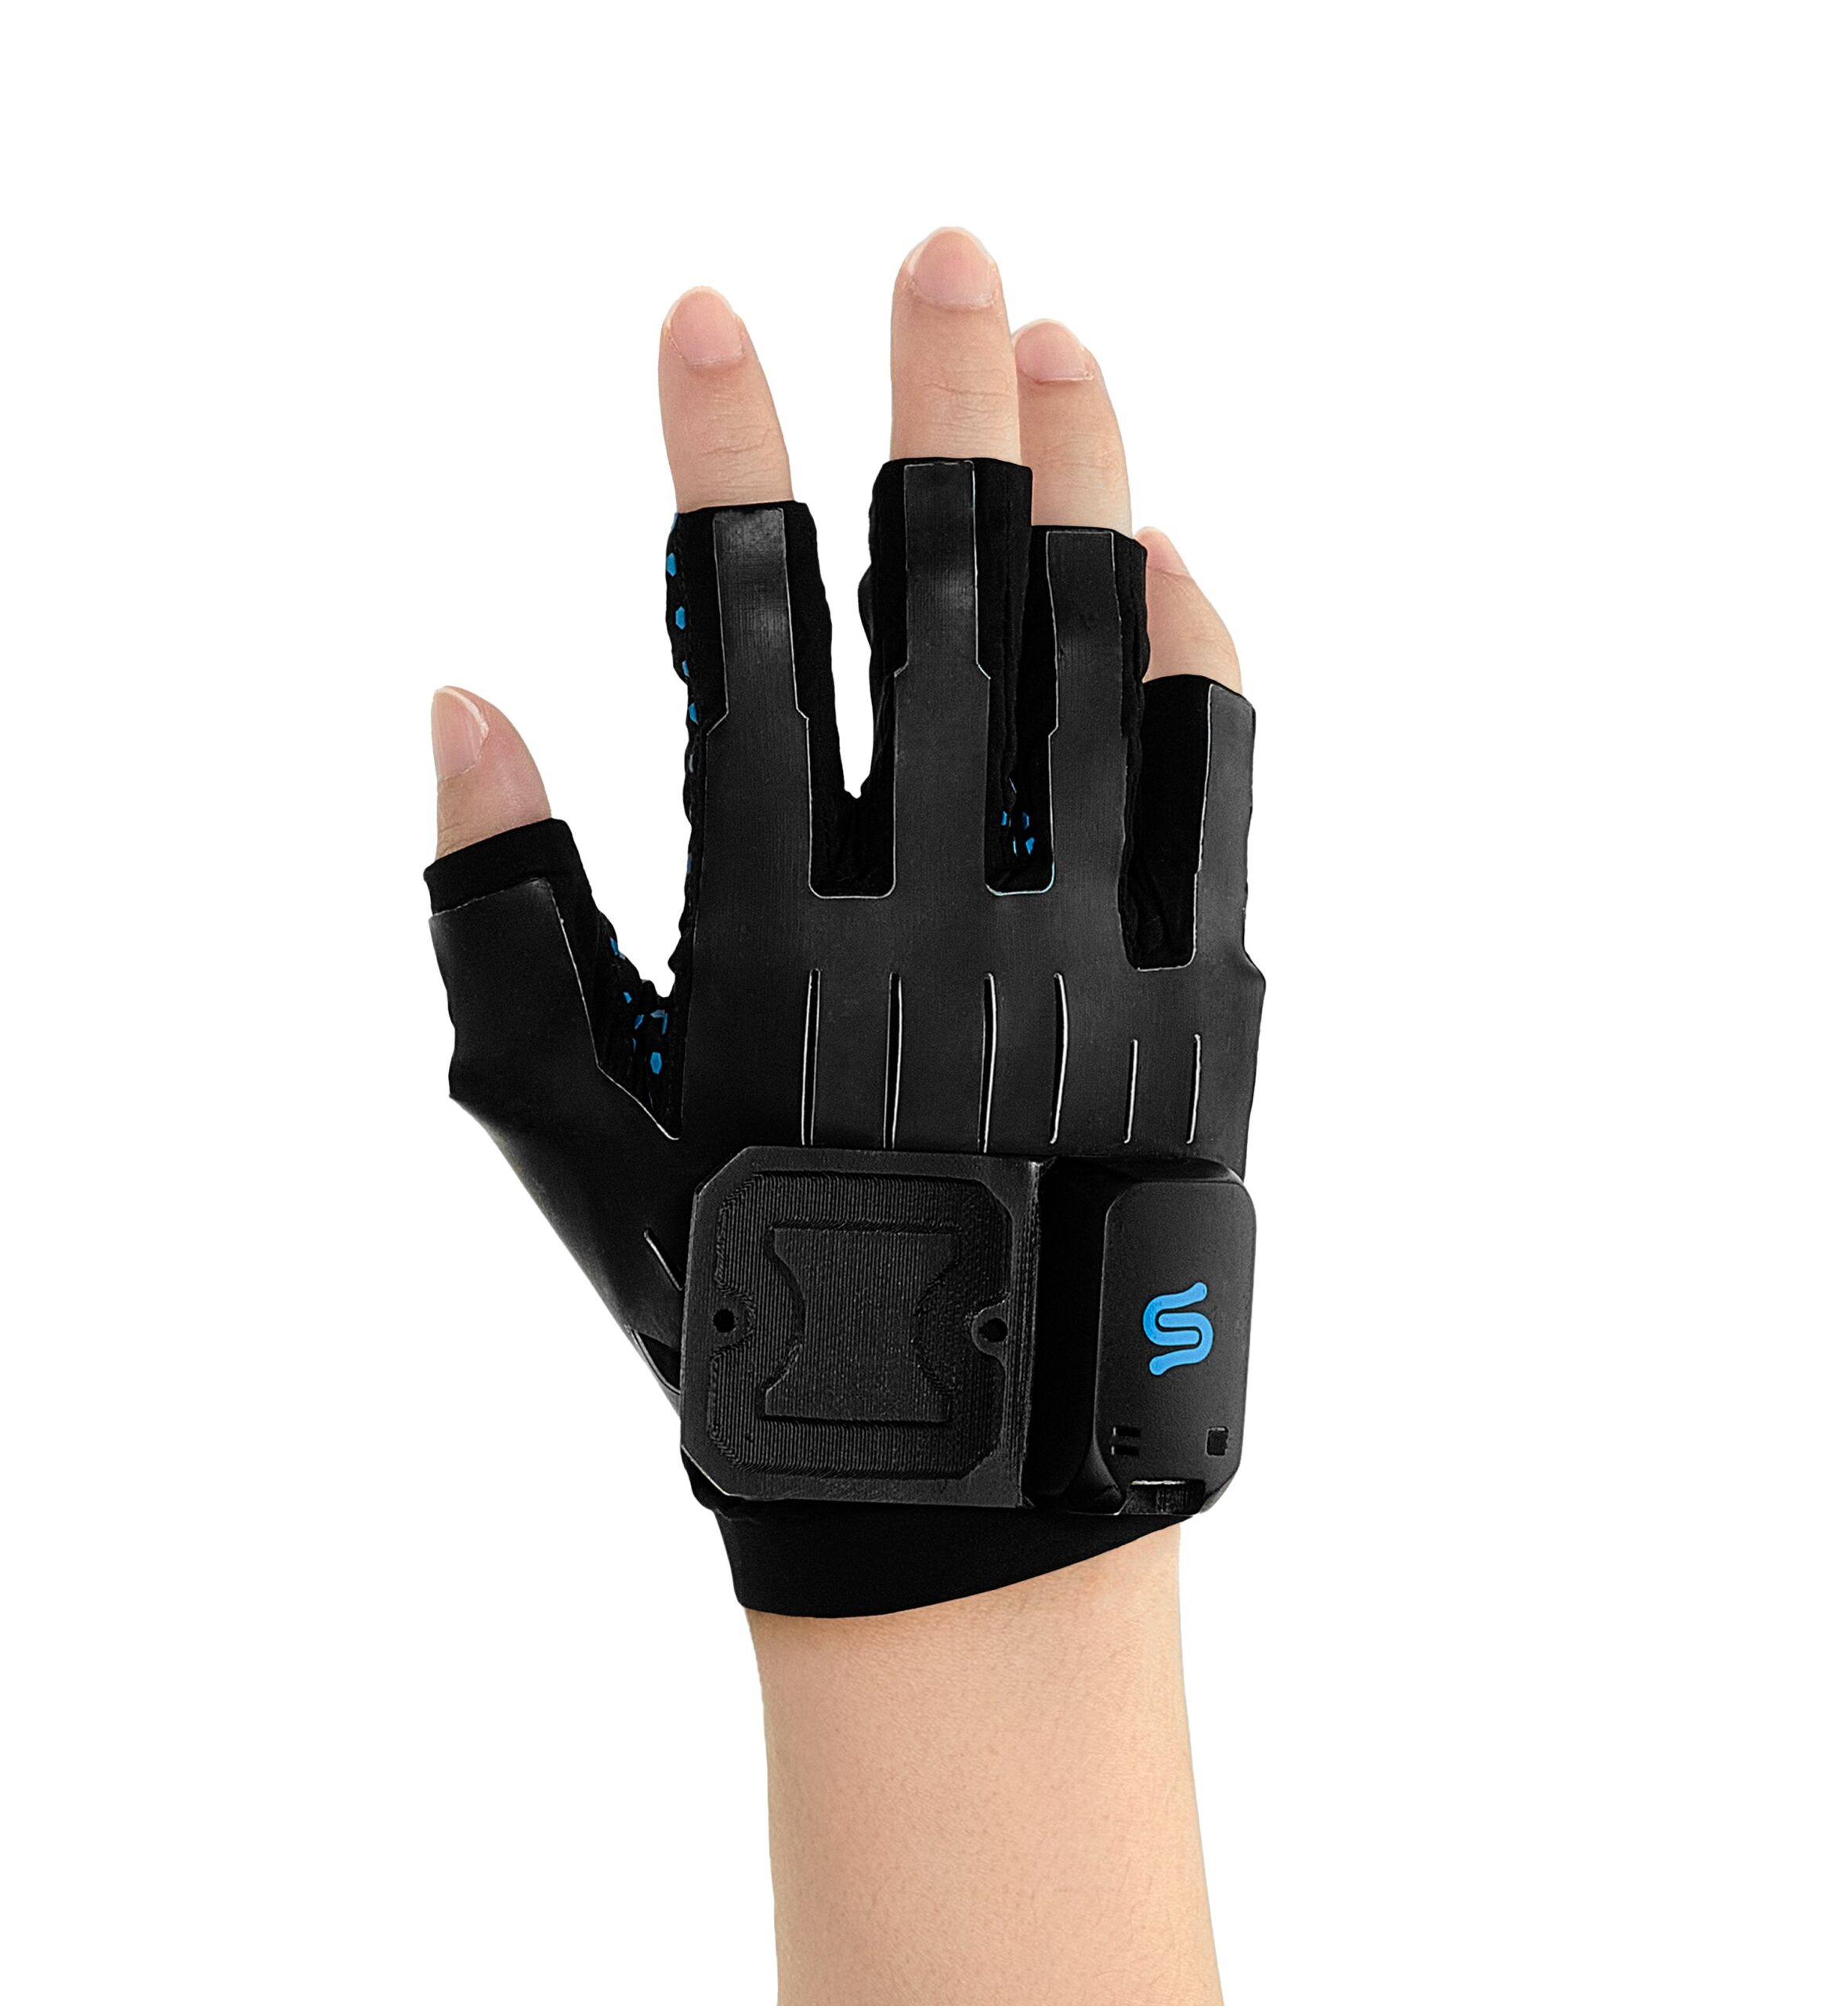 StretchSense Reality Glove. Extended reality glove for Unity, Unreal, OpenXR, SteamVR